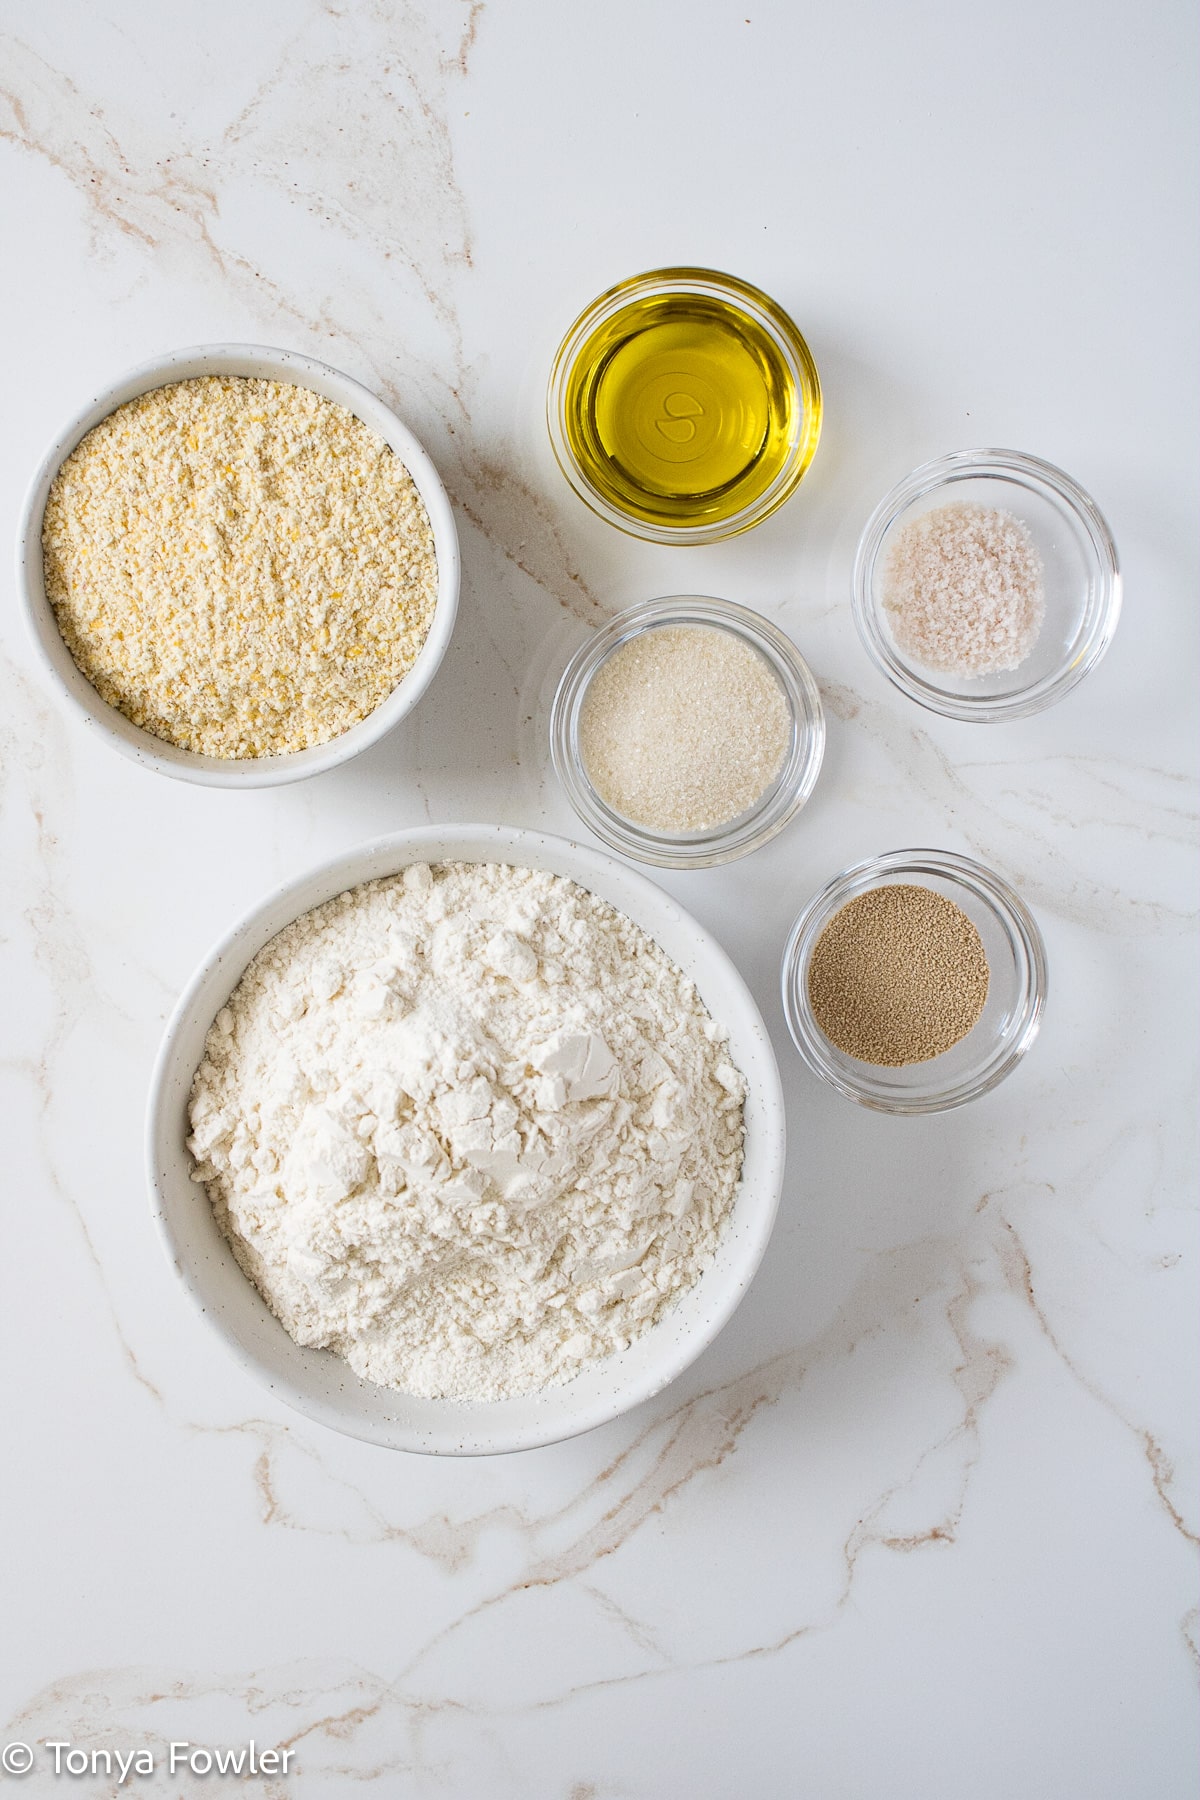 Cornmeal pizza crust ingredients on a table.